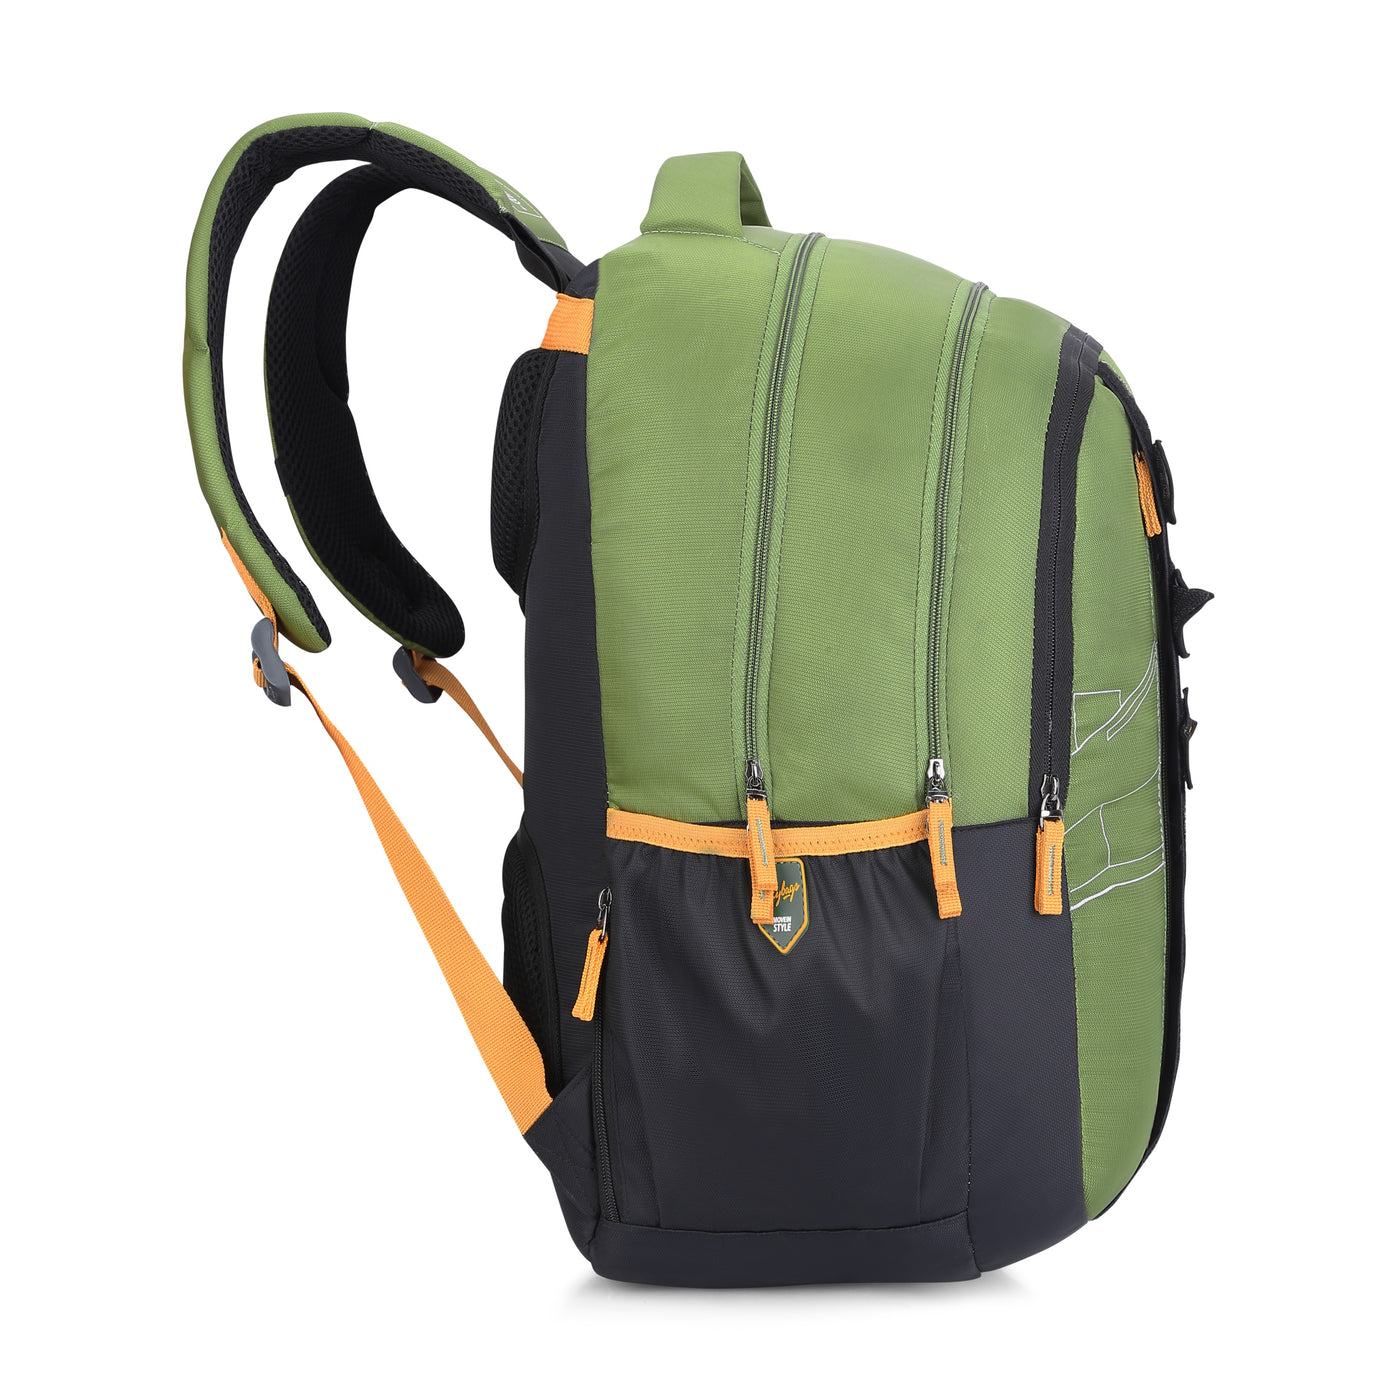 Skybags MAZE PRO 05 